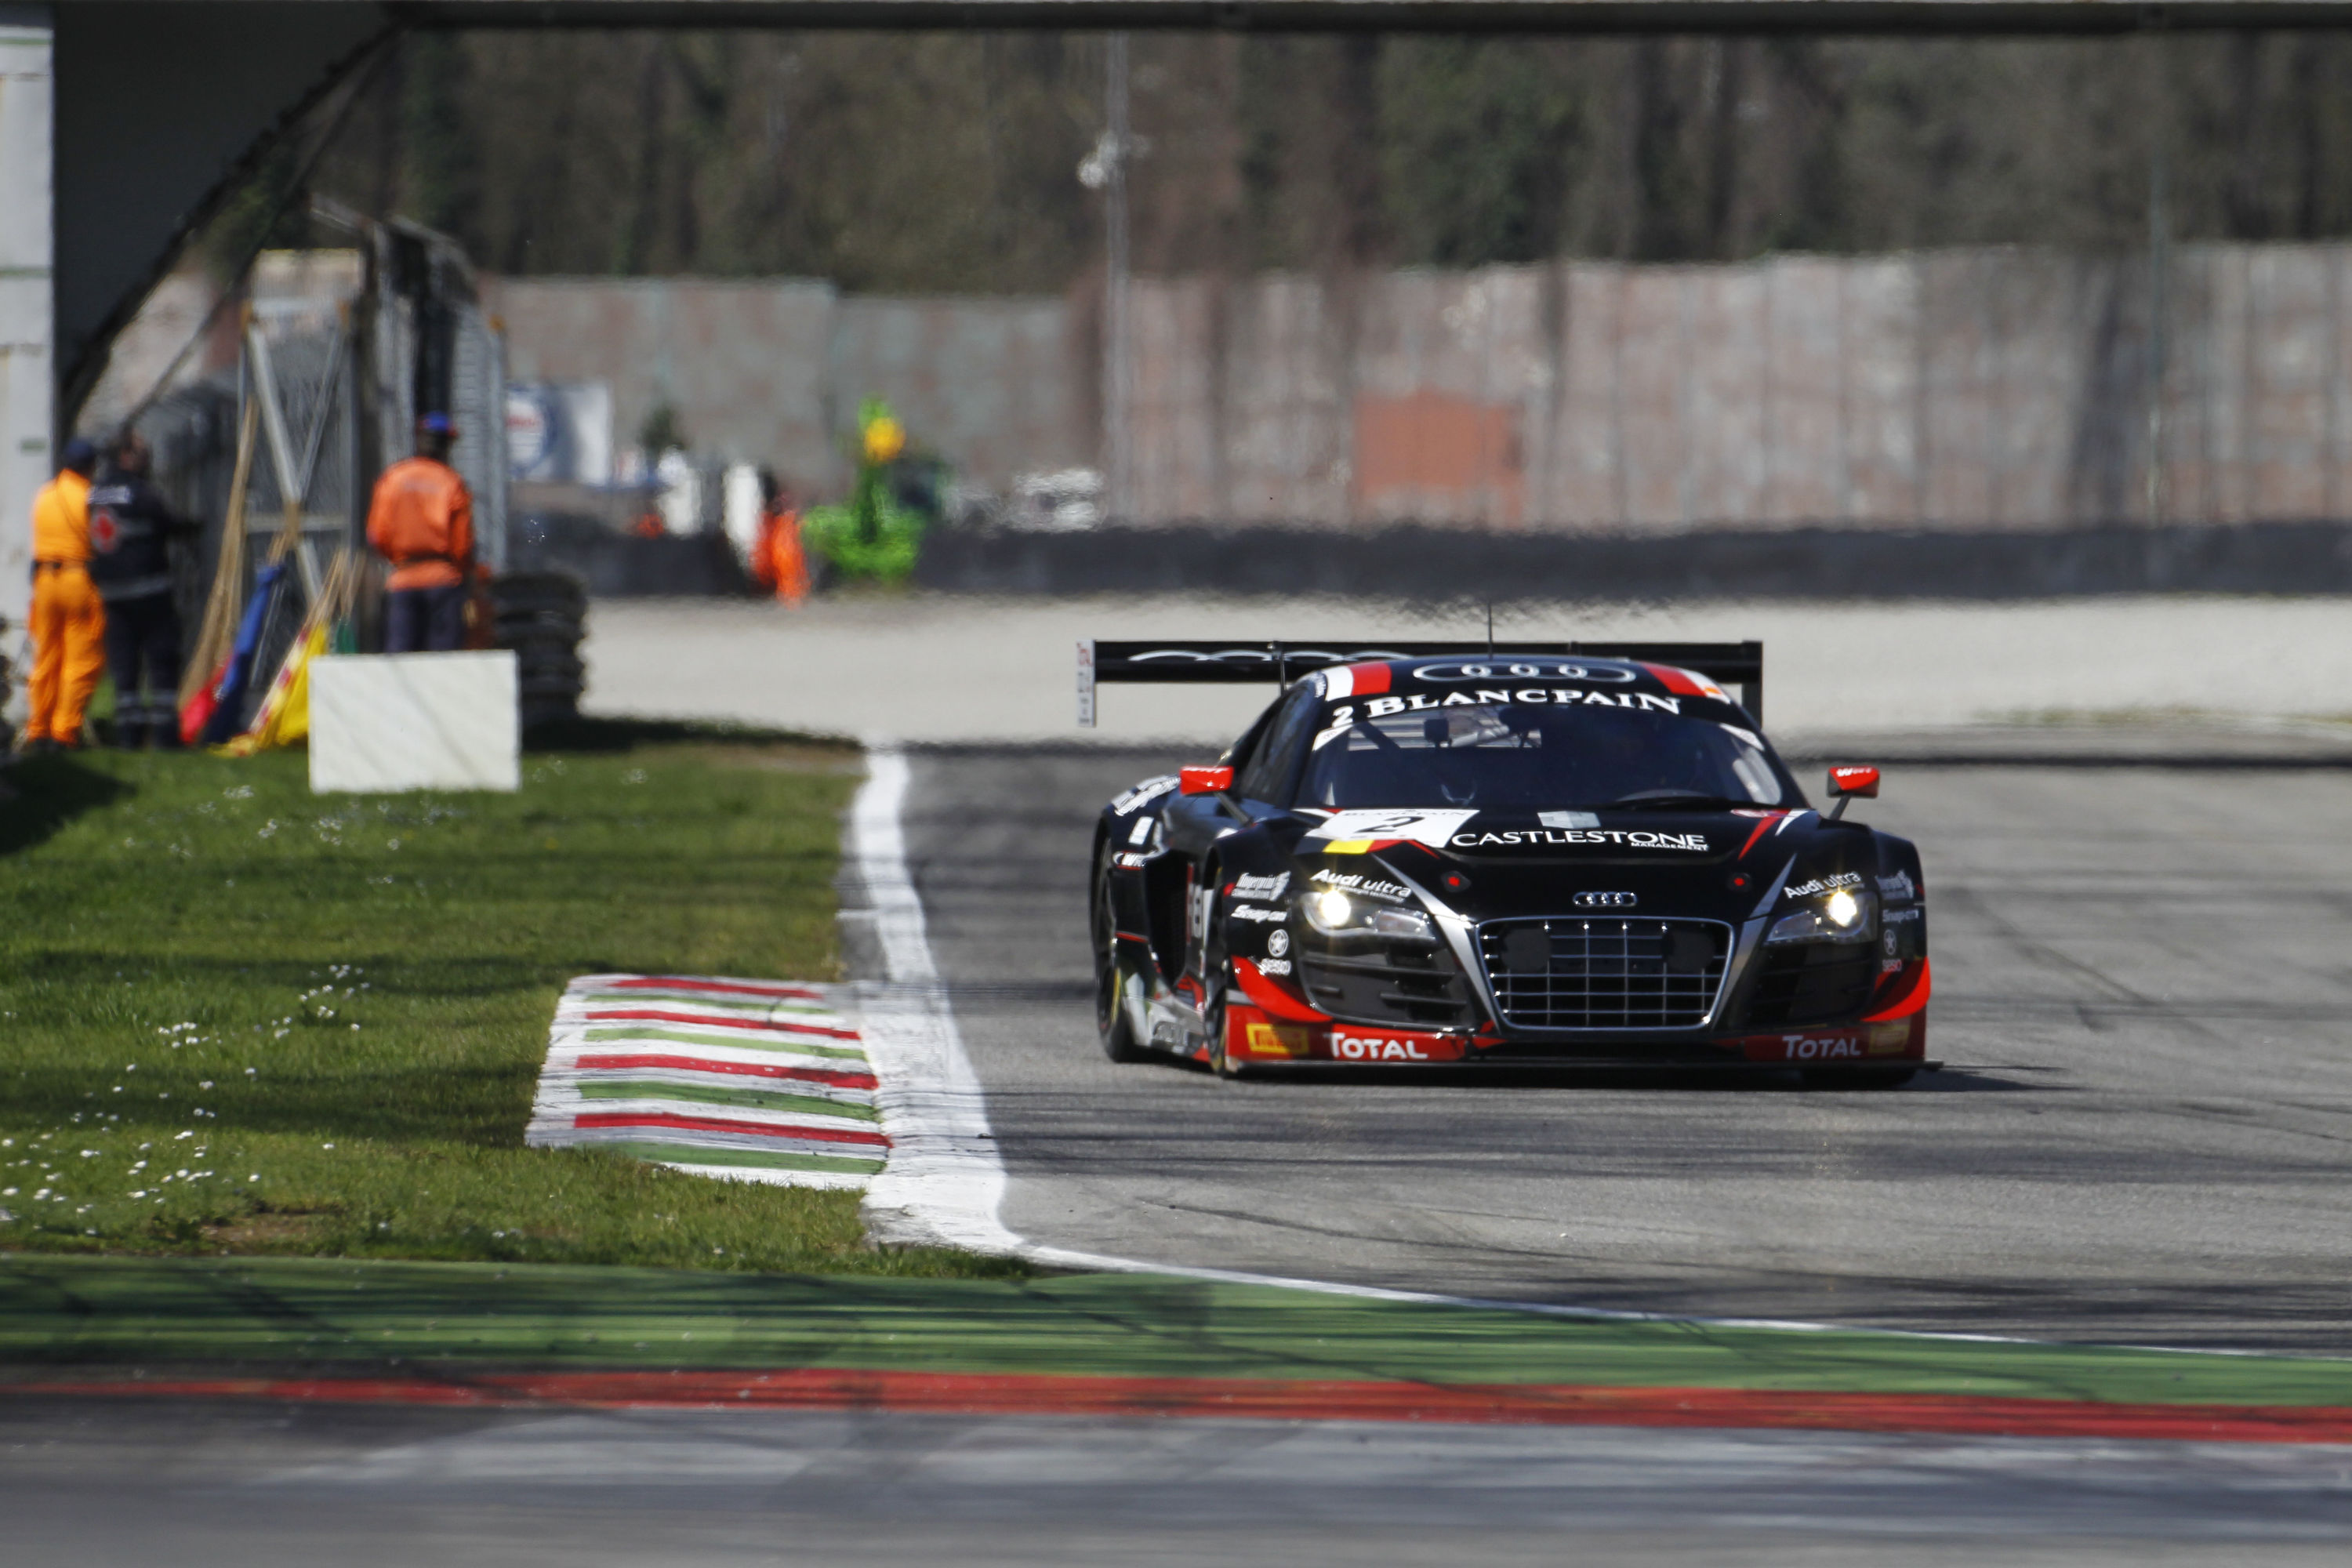 Halliday recovers to 17th at Monza